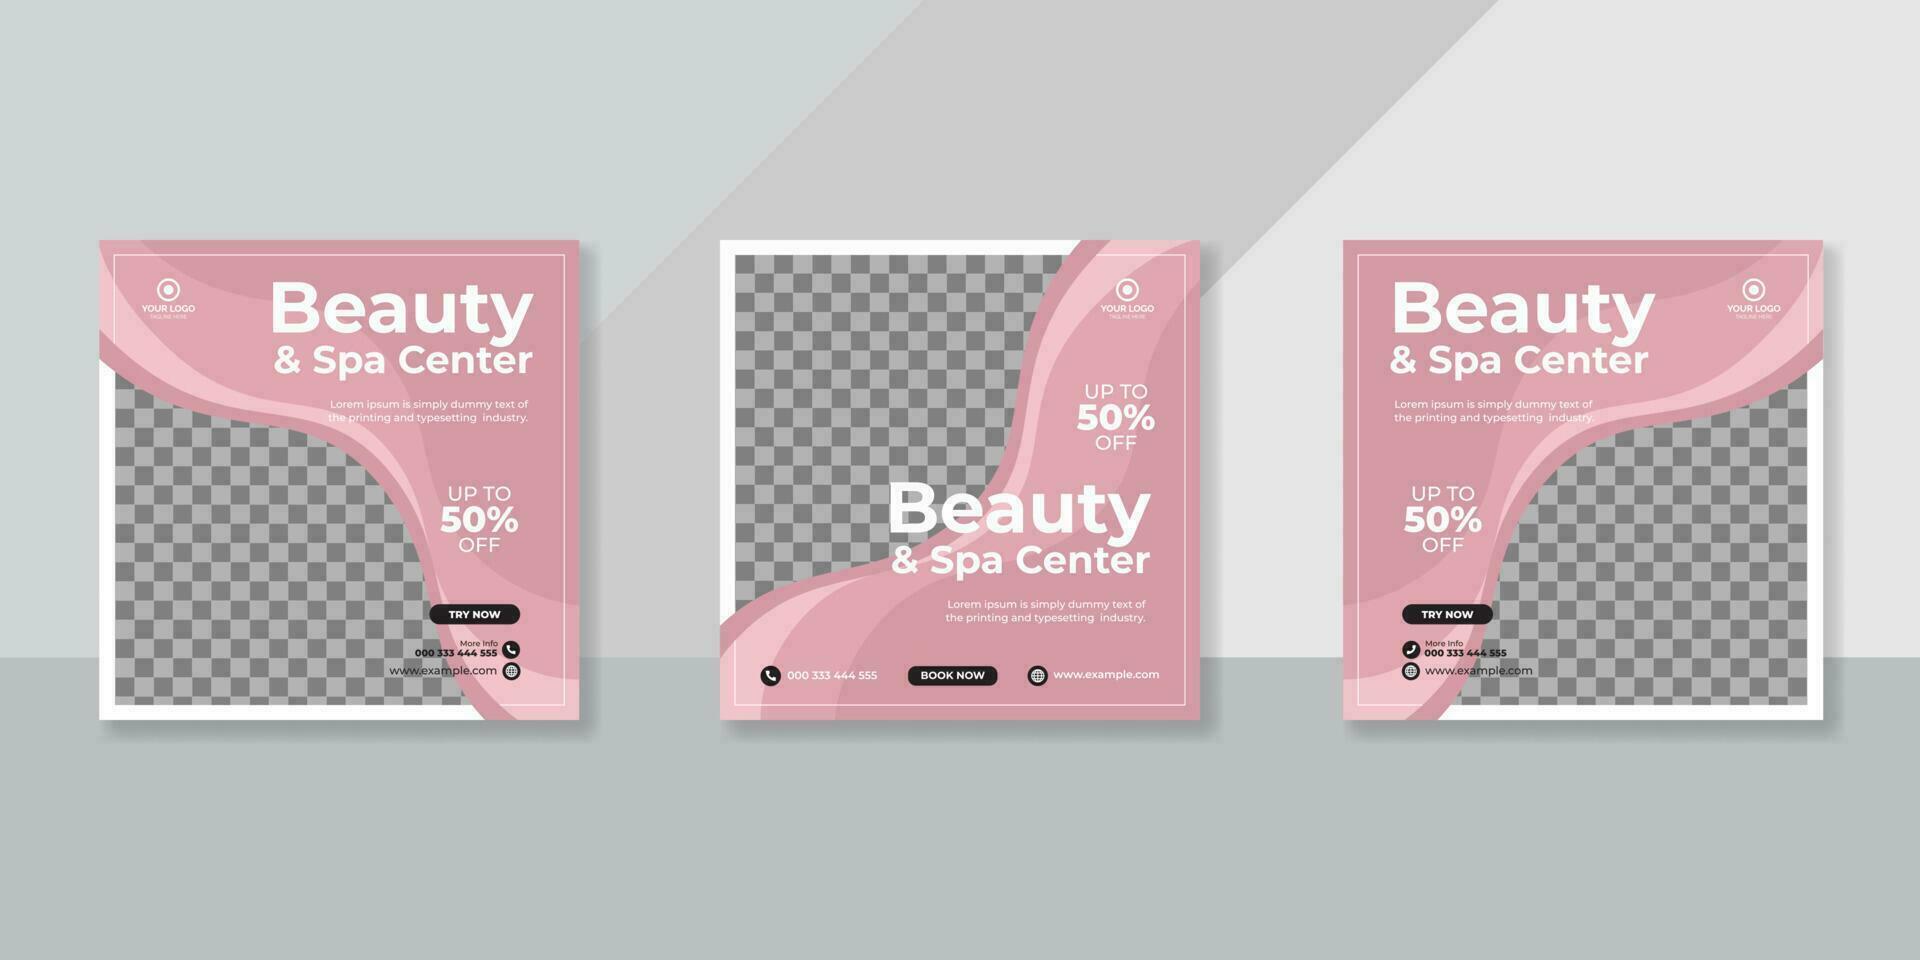 Beauty salon and spa promotion social media post template vector